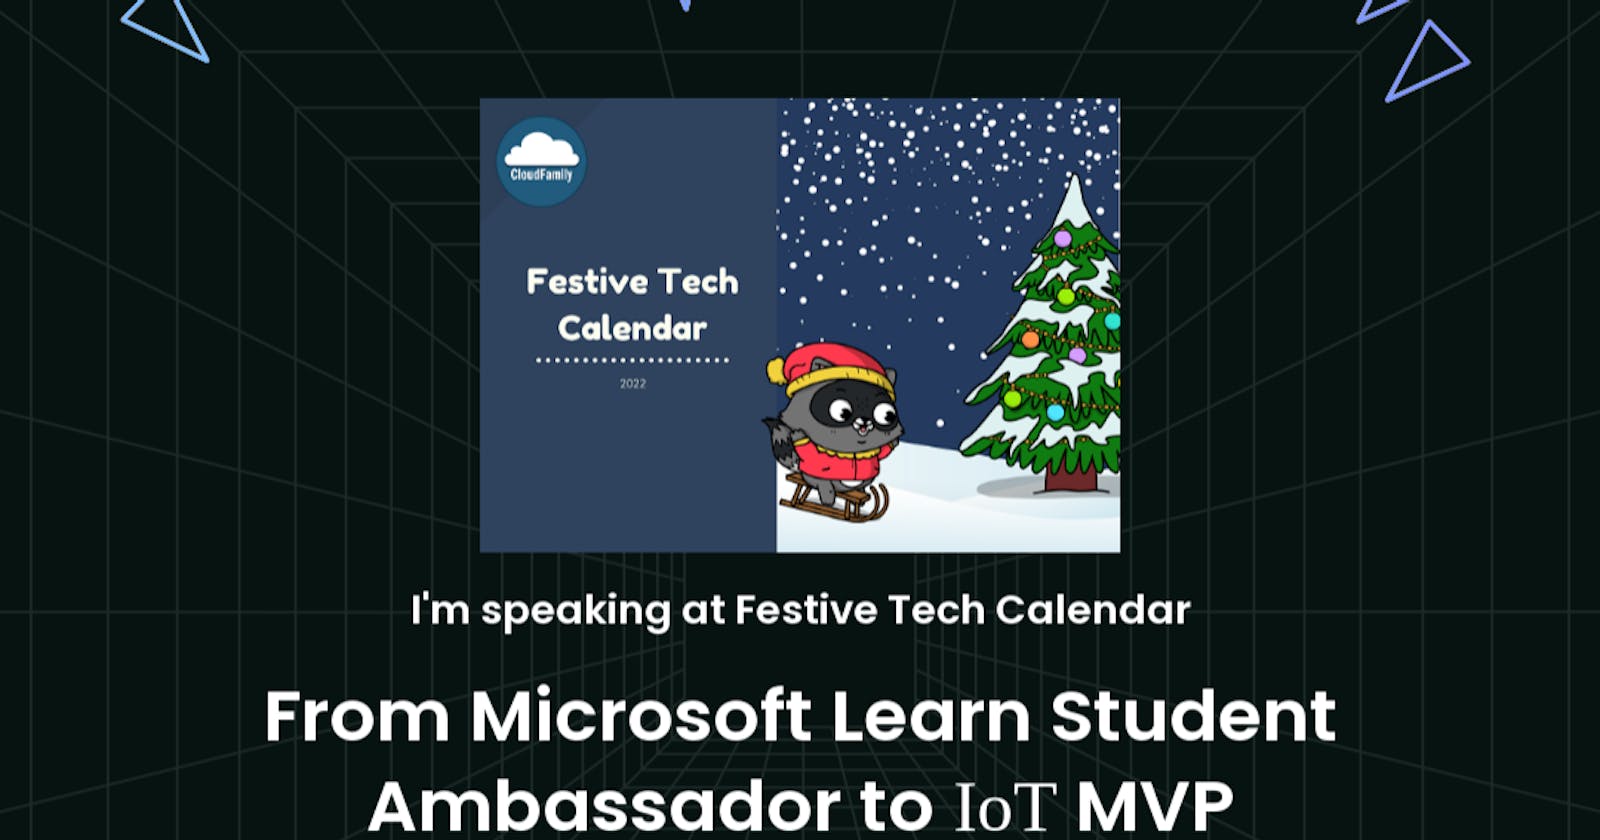 From a Microsoft Learn Student Ambassador to IoT Microsoft Most Valuable Professional – MVP